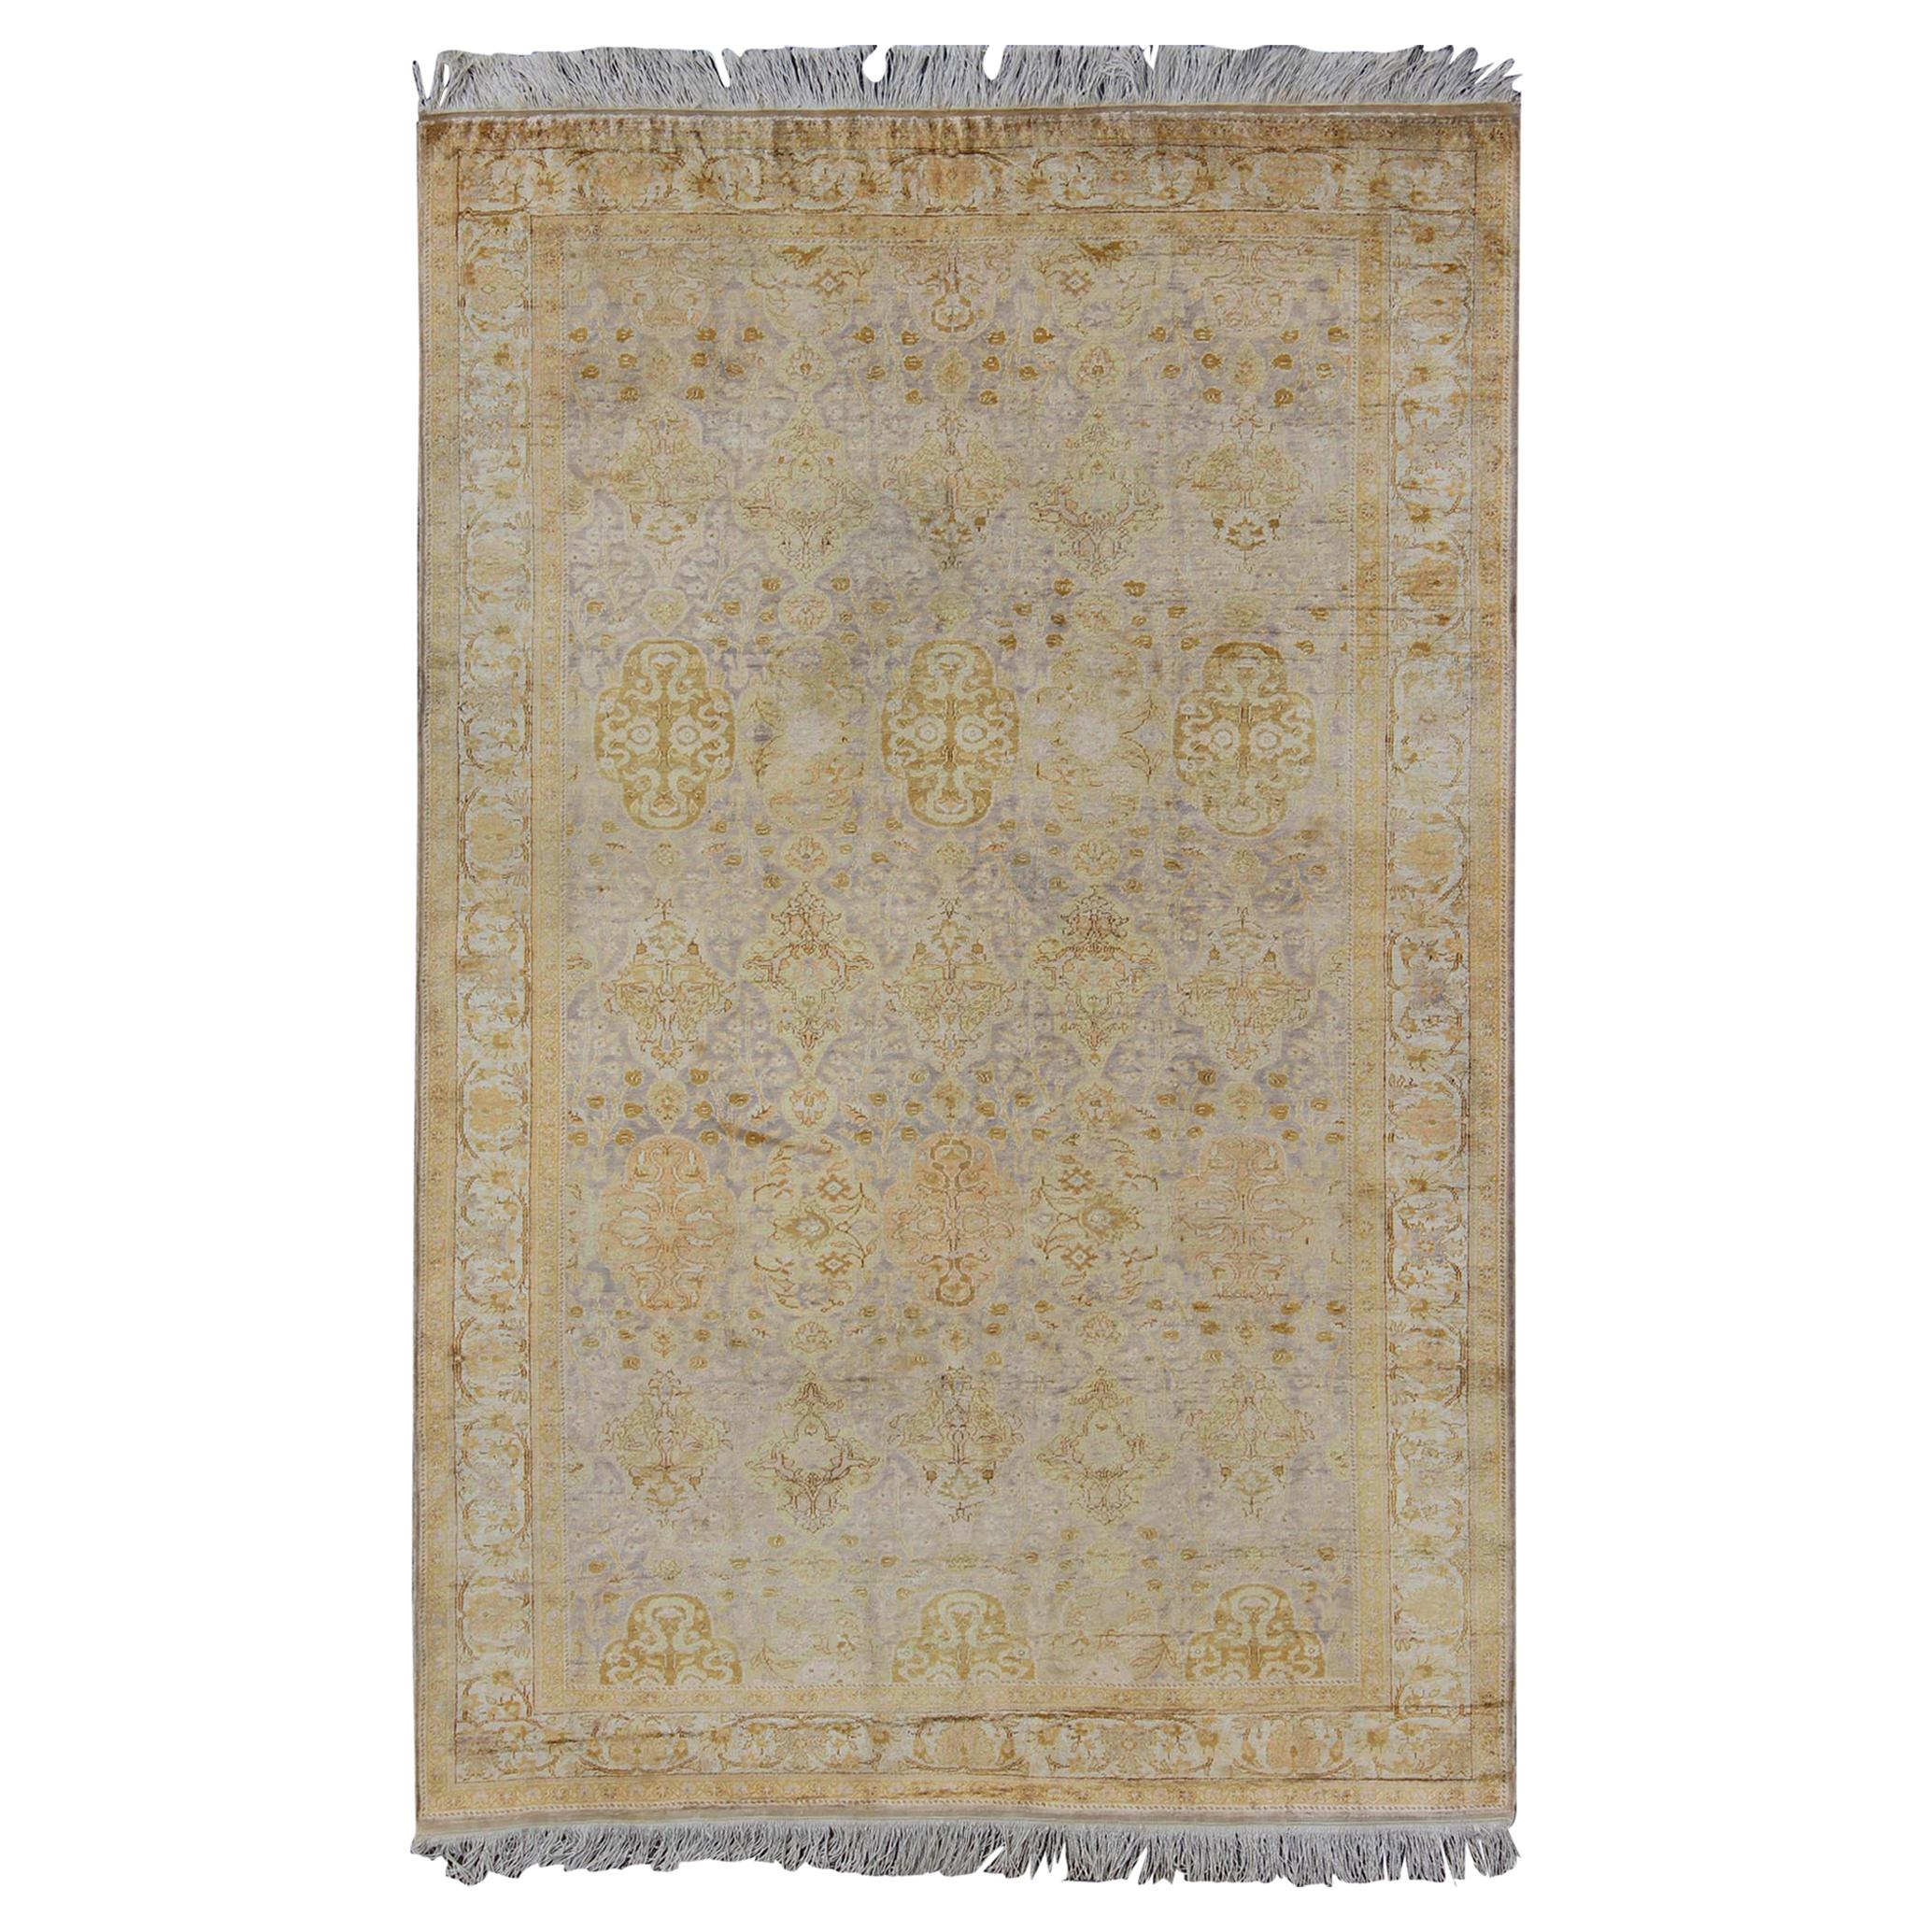 Silk Turkish Sivas with All-Over Stylized Design in Gold, Lavender and Cream For Sale